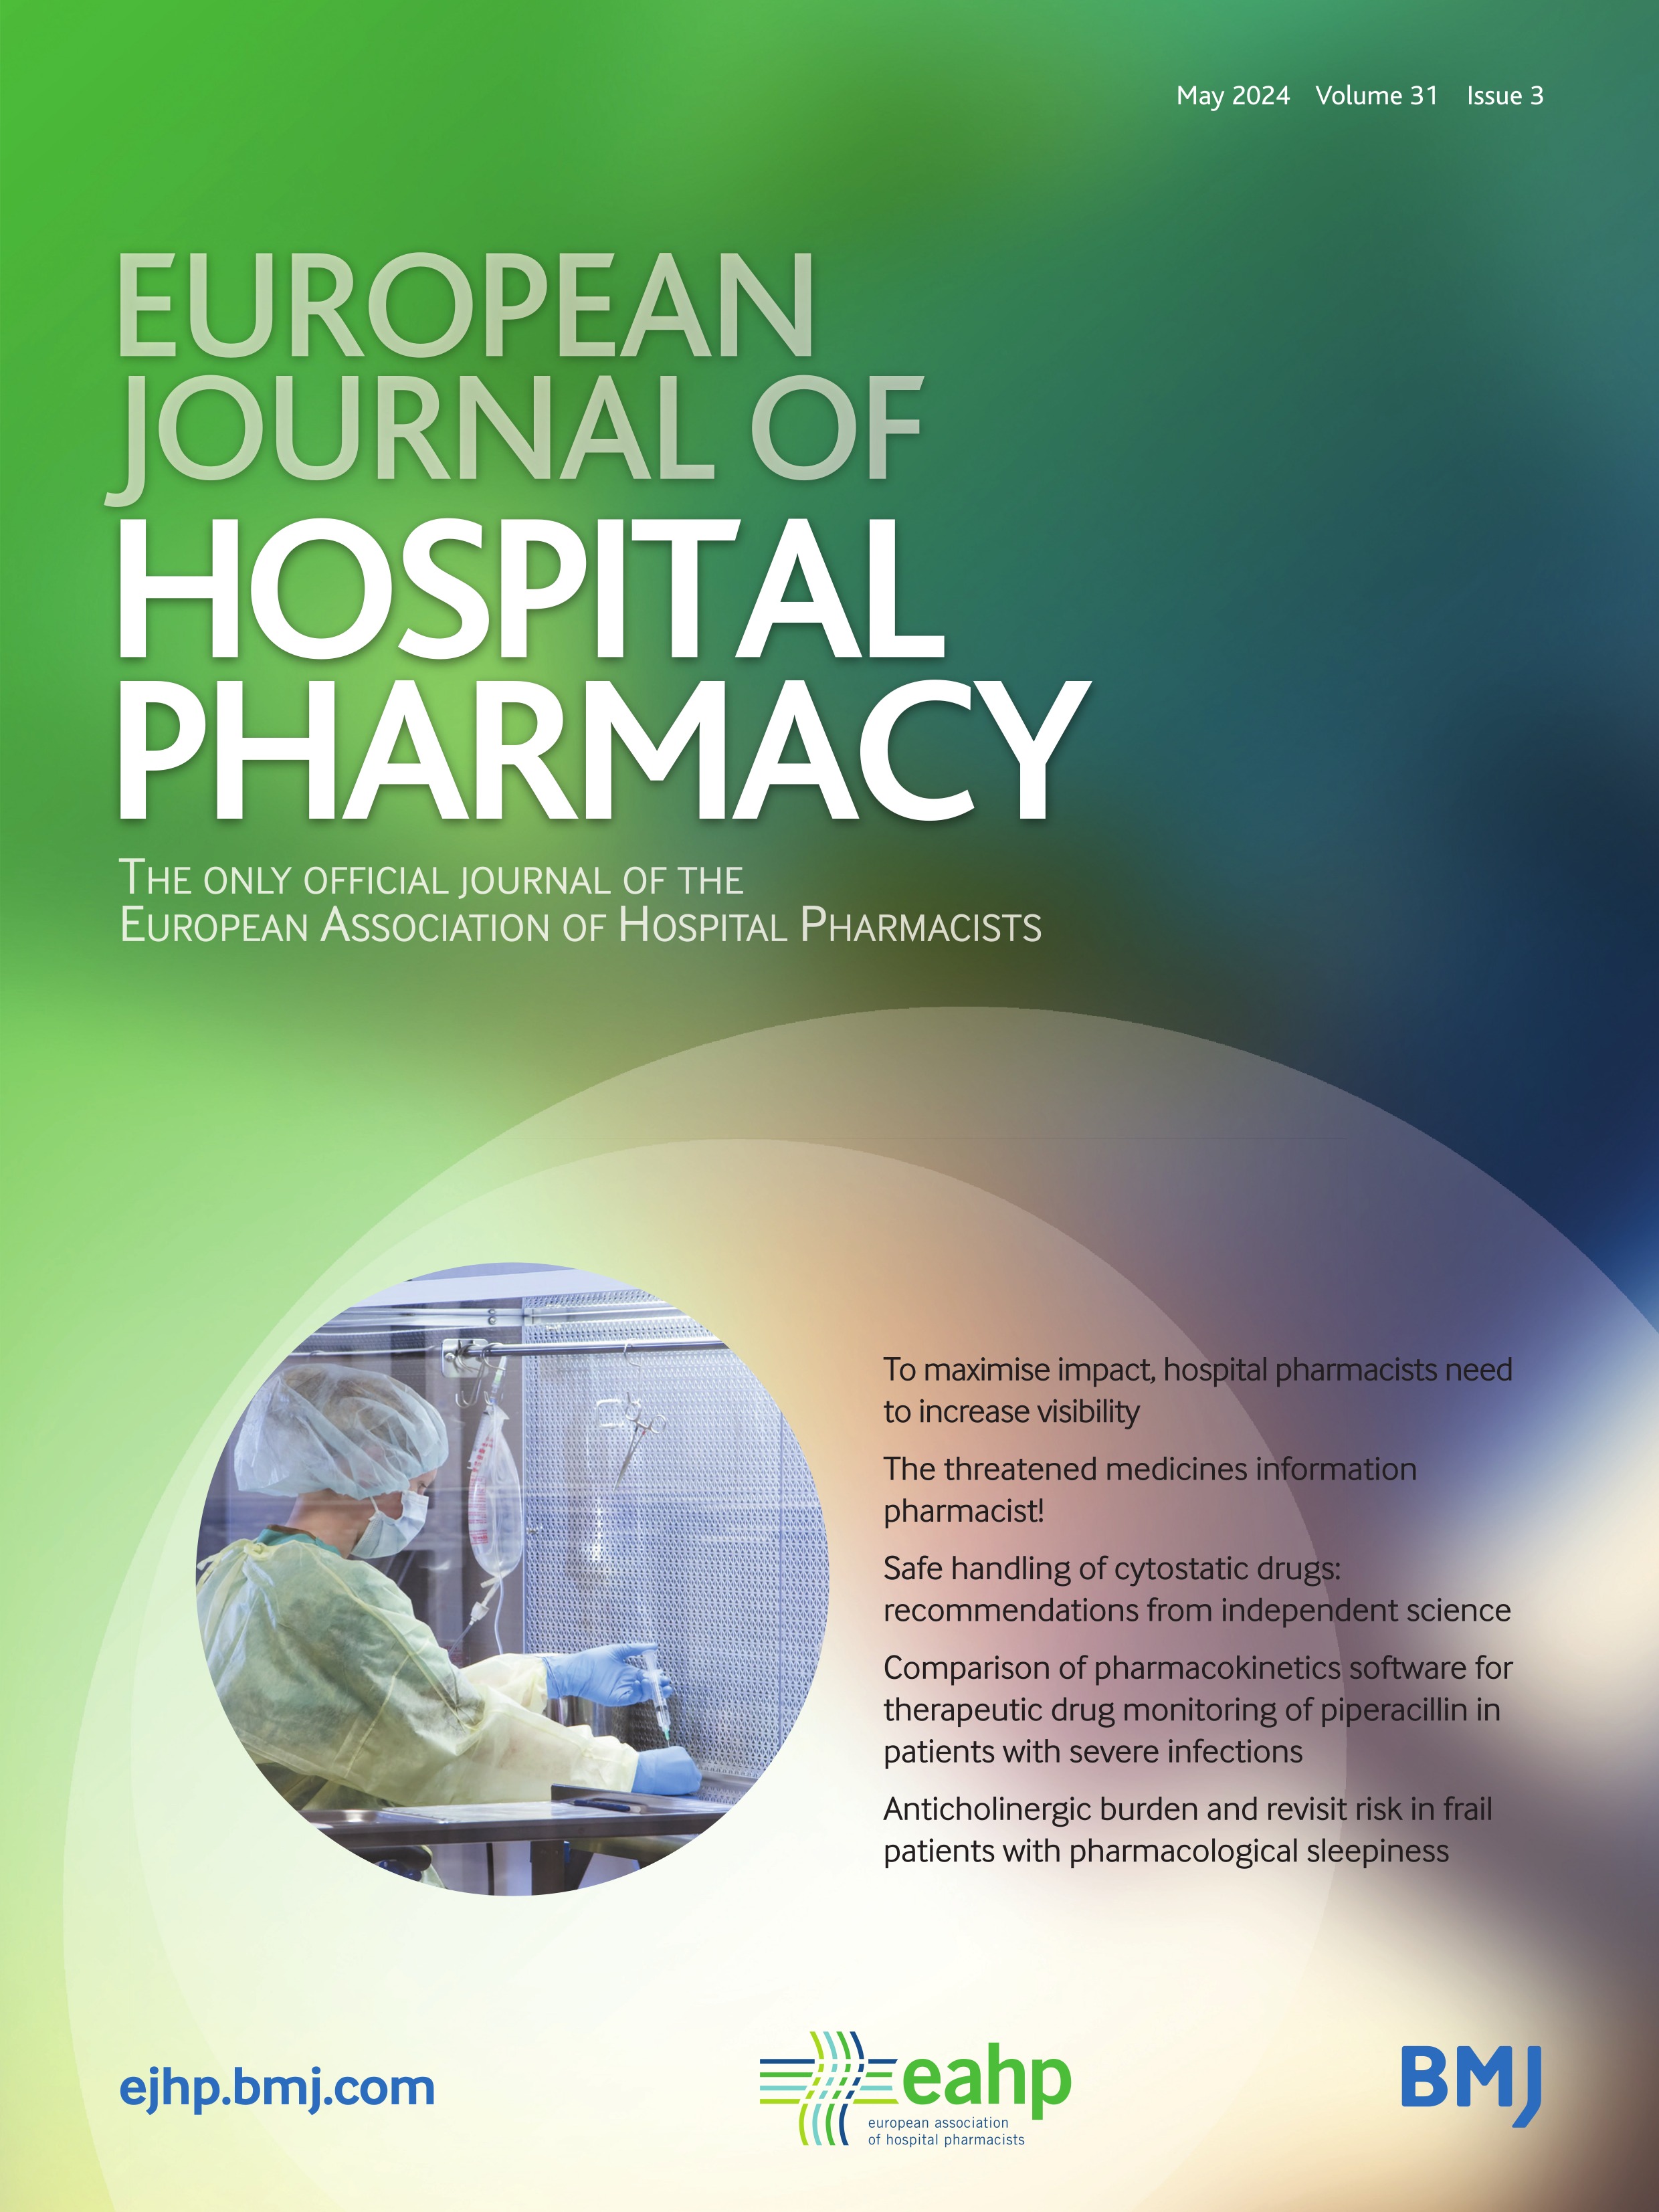 Safe handling of cytostatic drugs: recommendations from independent science